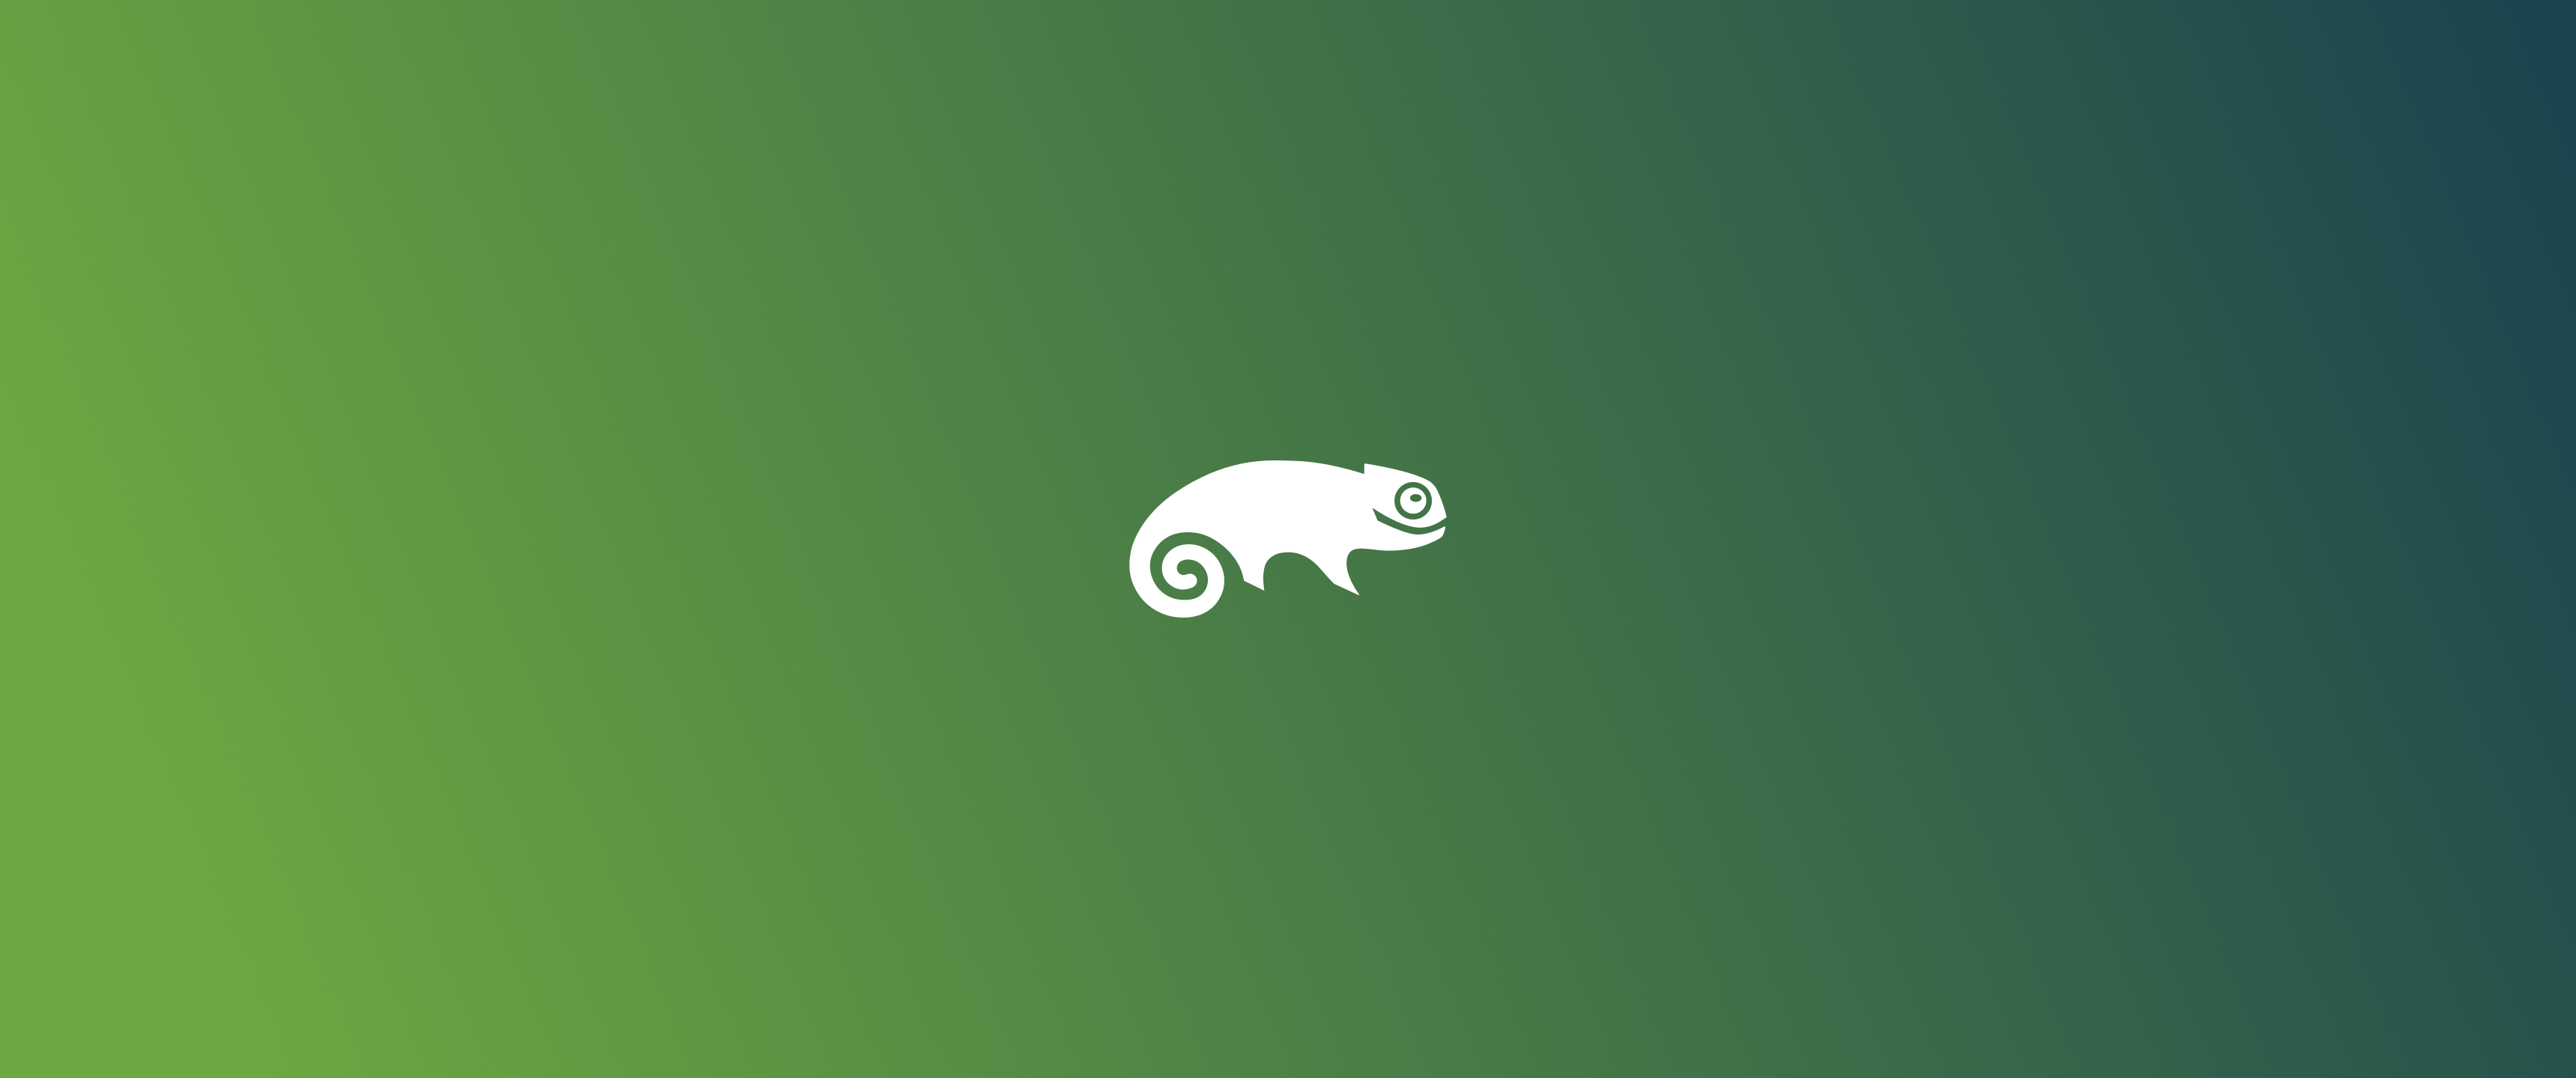 General 3440x1440 Linux minimalism gradient openSUSE simple background logo